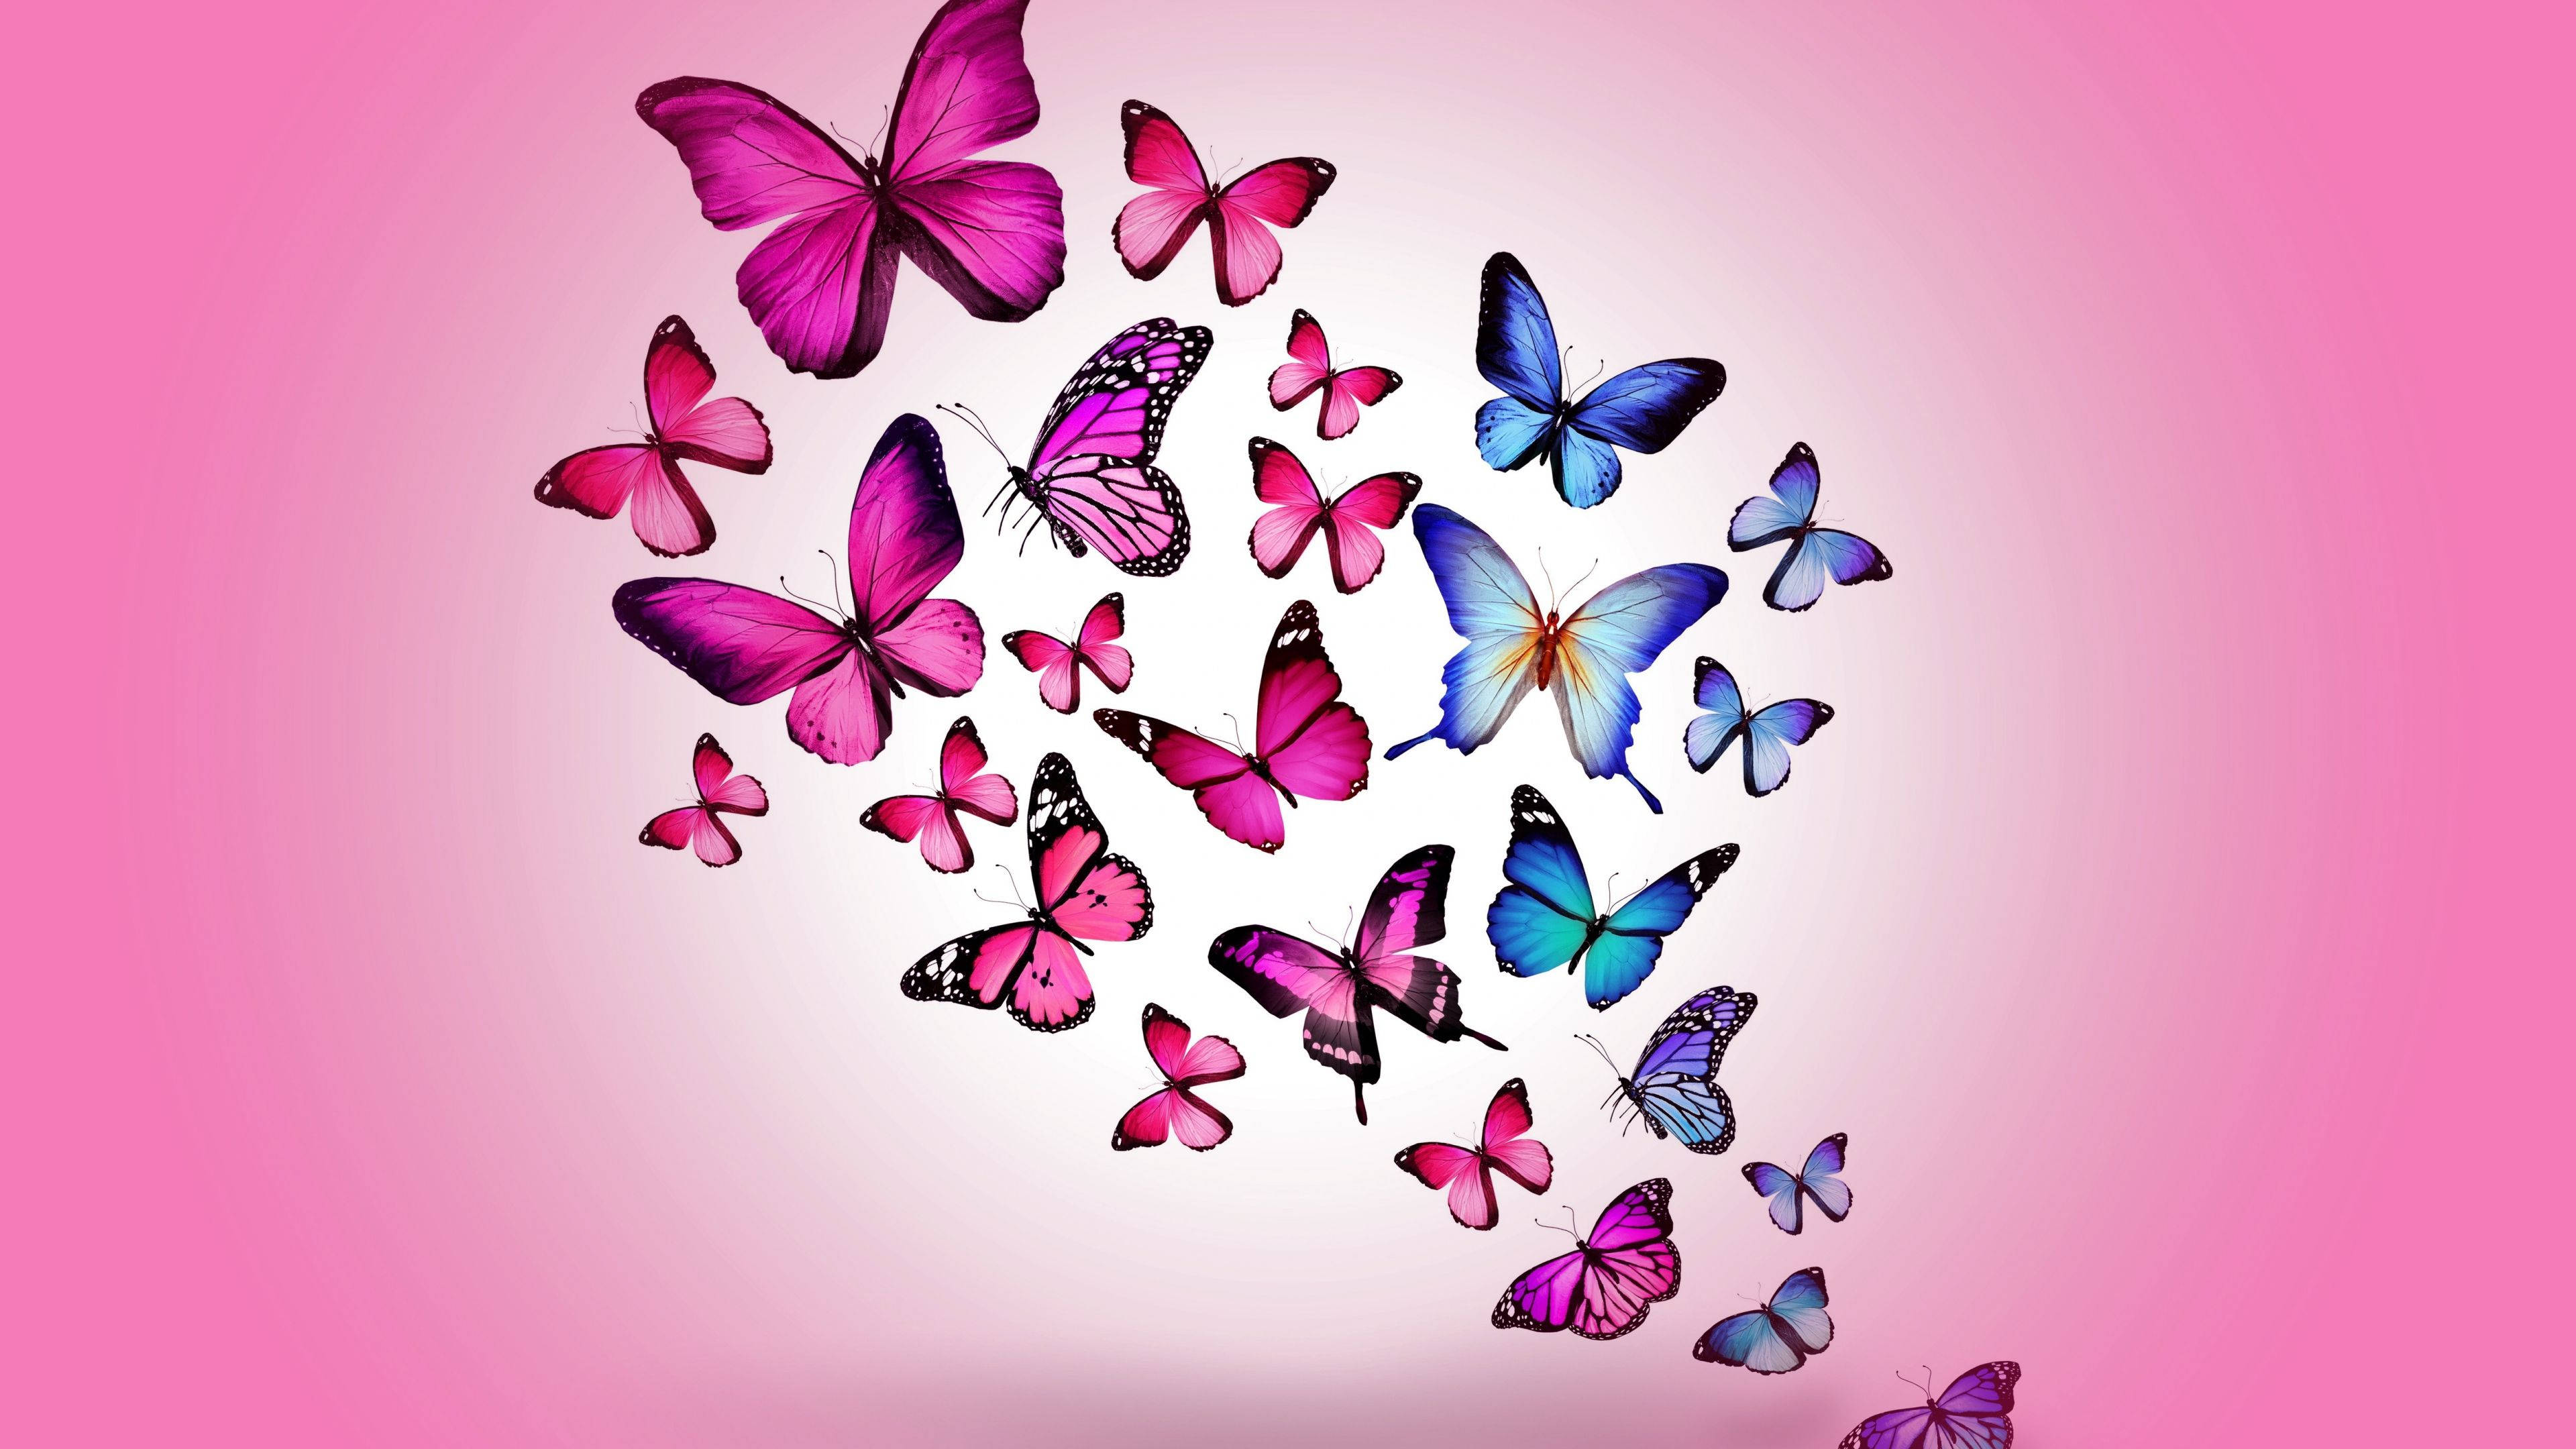 Cute Aesthetic Pink Butterfly Wallpapers  Wallpaper Cave  Pink wallpaper  backgrounds Pink wallpaper girly Cute pink background